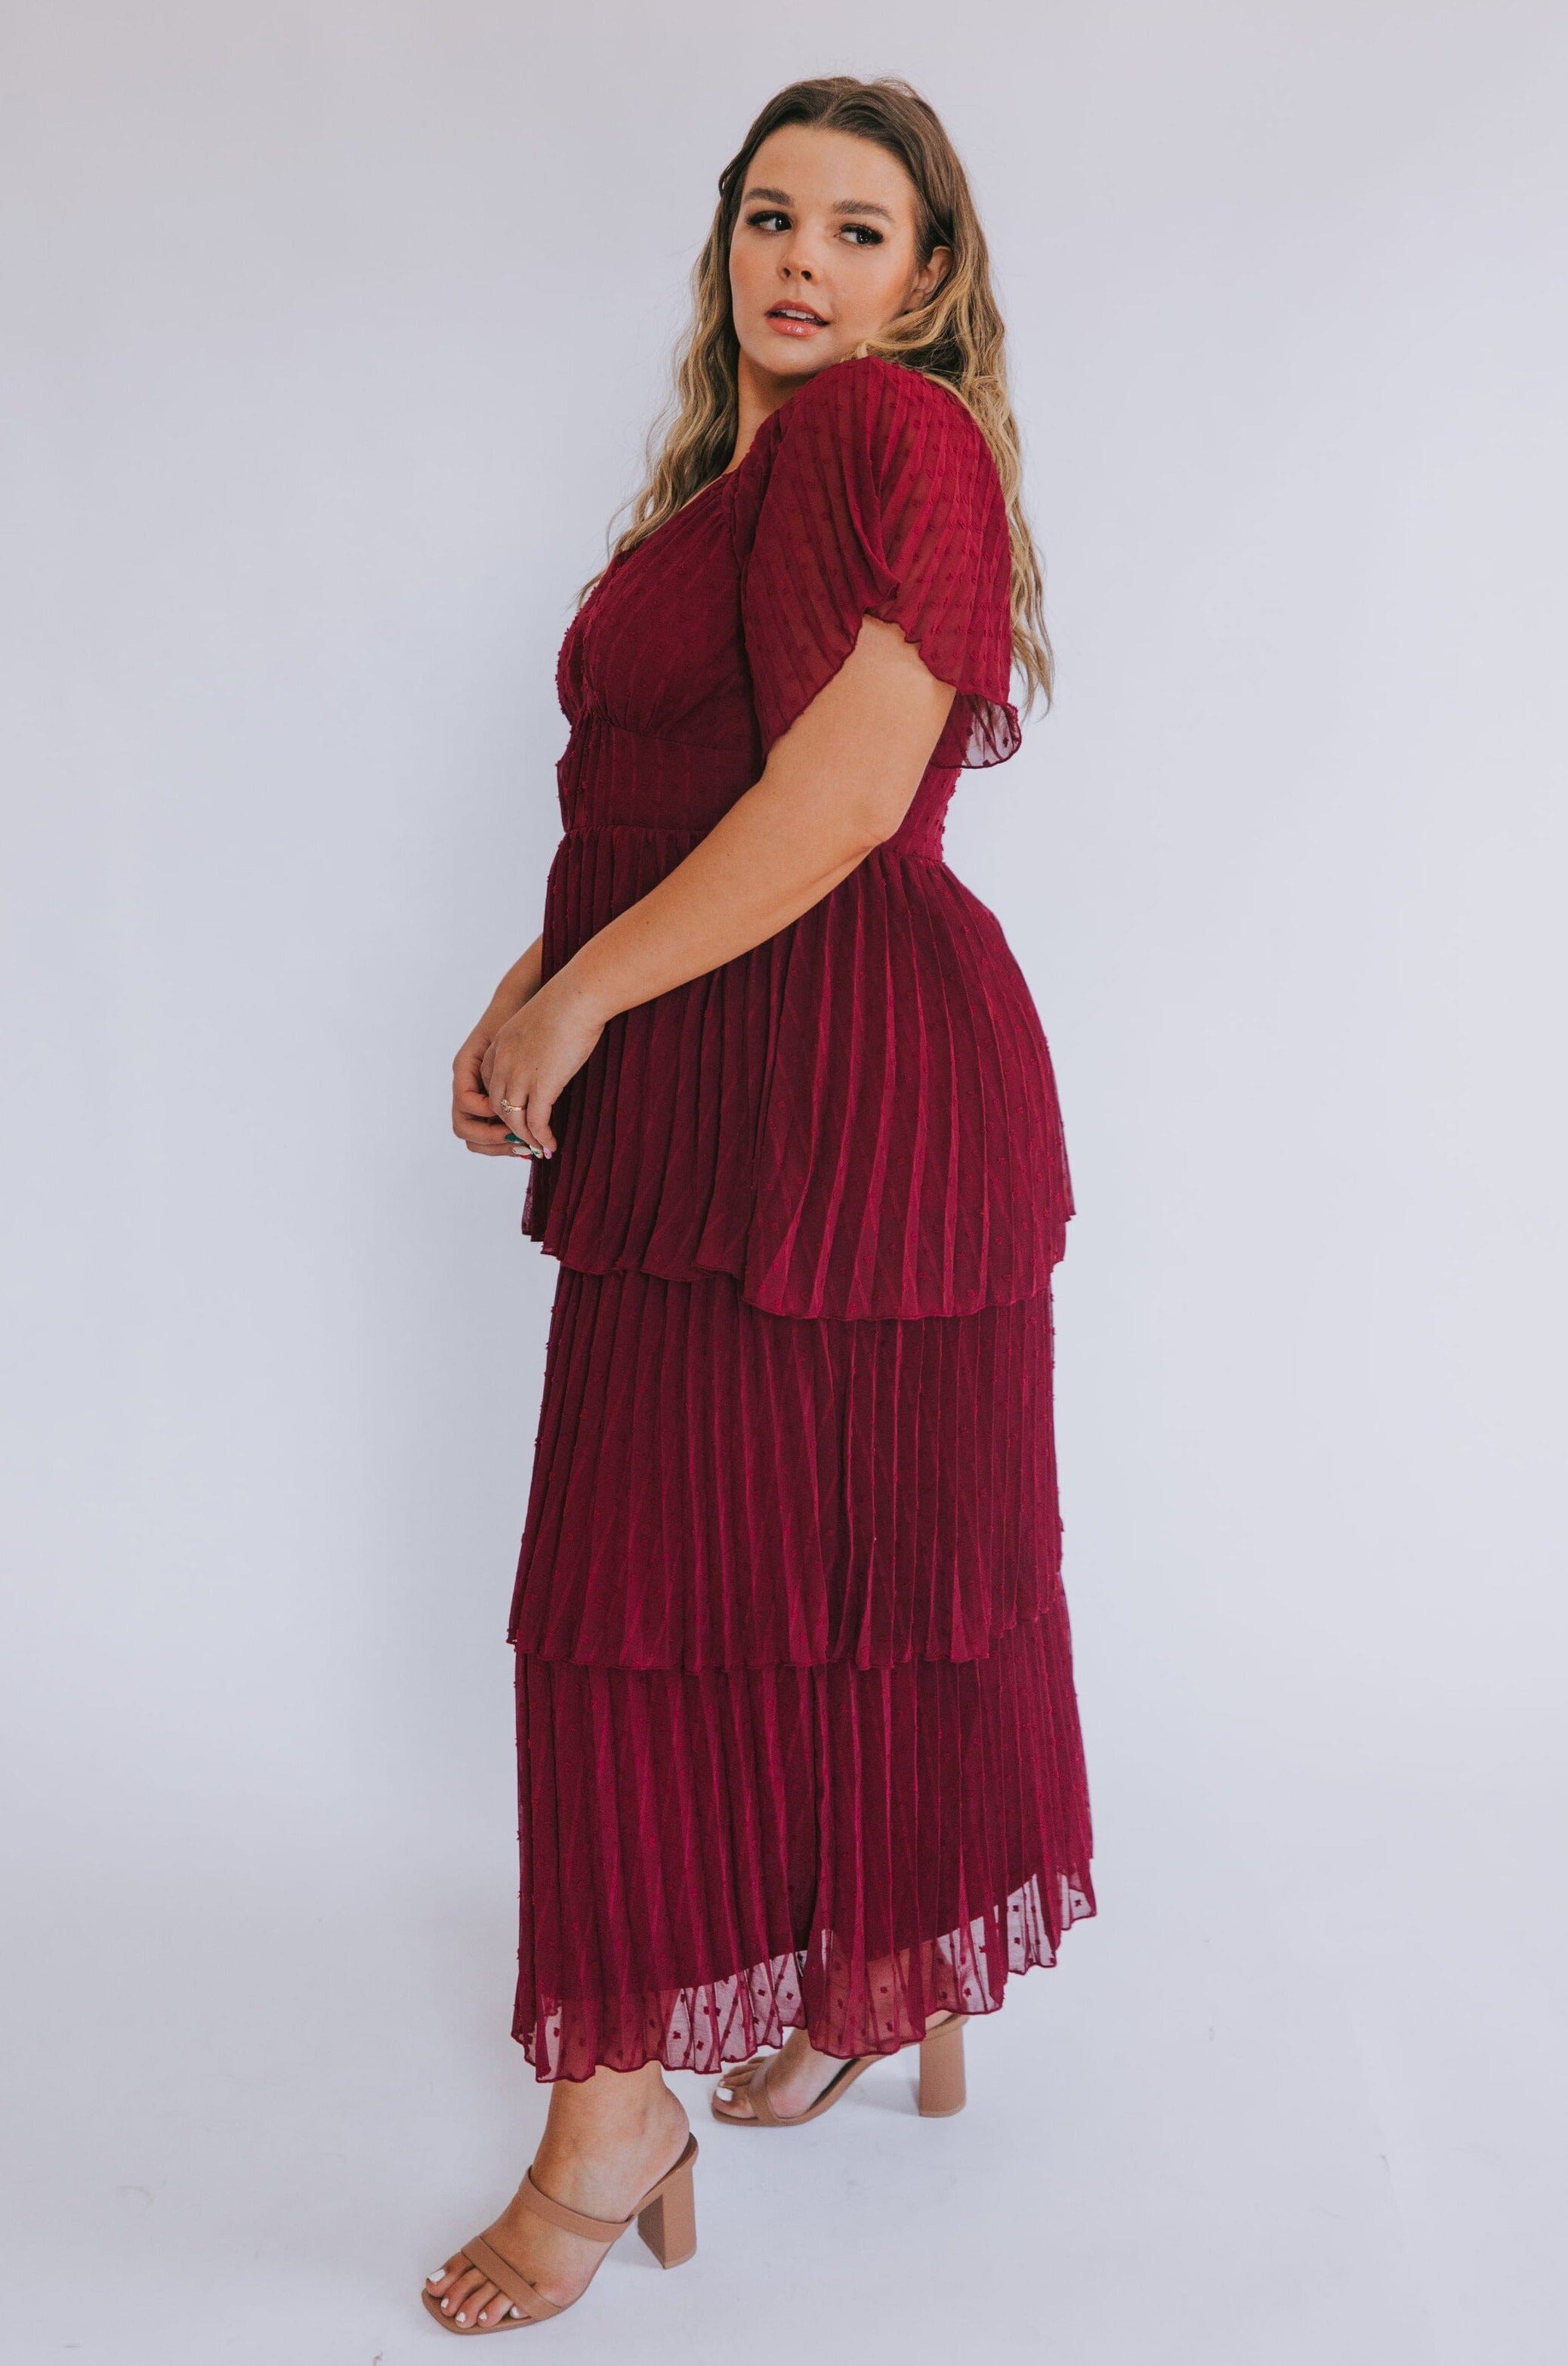 ONE LOVED BABE - Warm Wishes Dress - 4 colors!